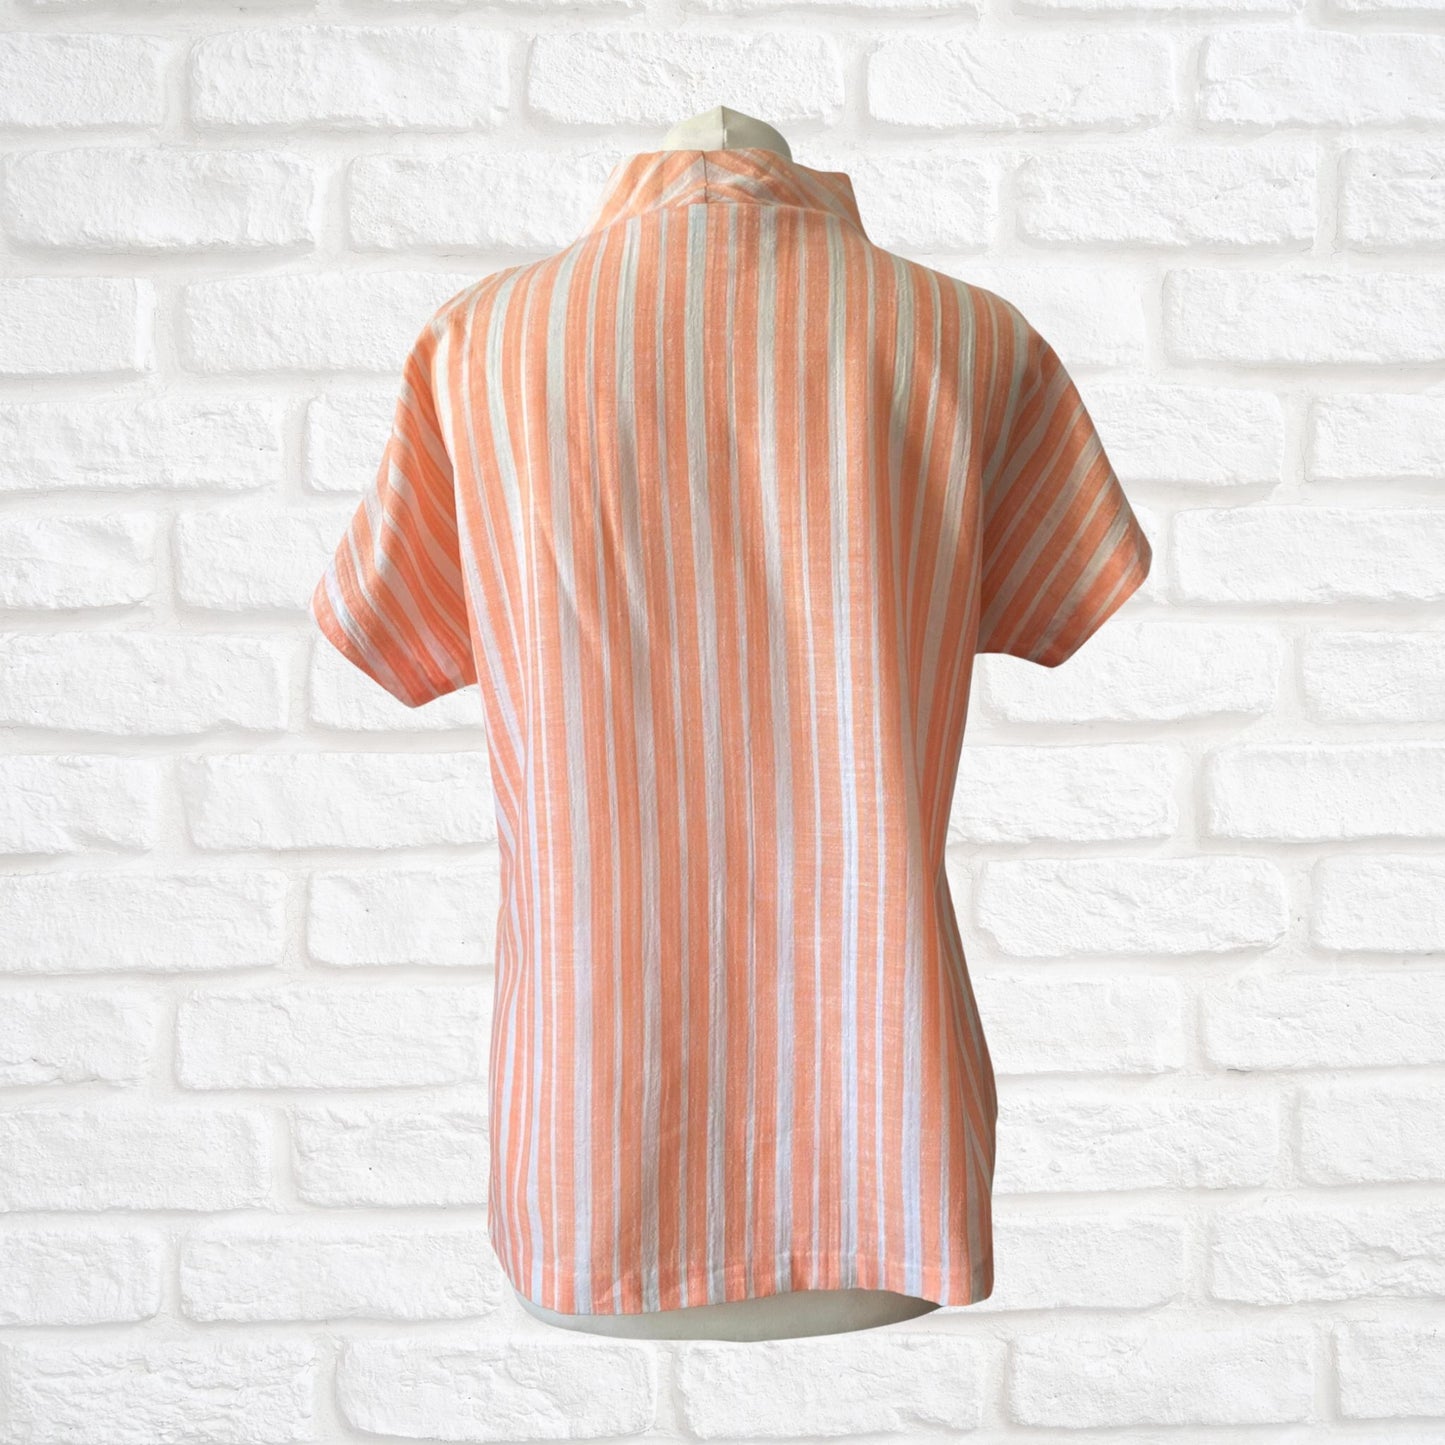 60s peach and white striped top by Jantzen Beachwear.   Approx  UK  size 12-16